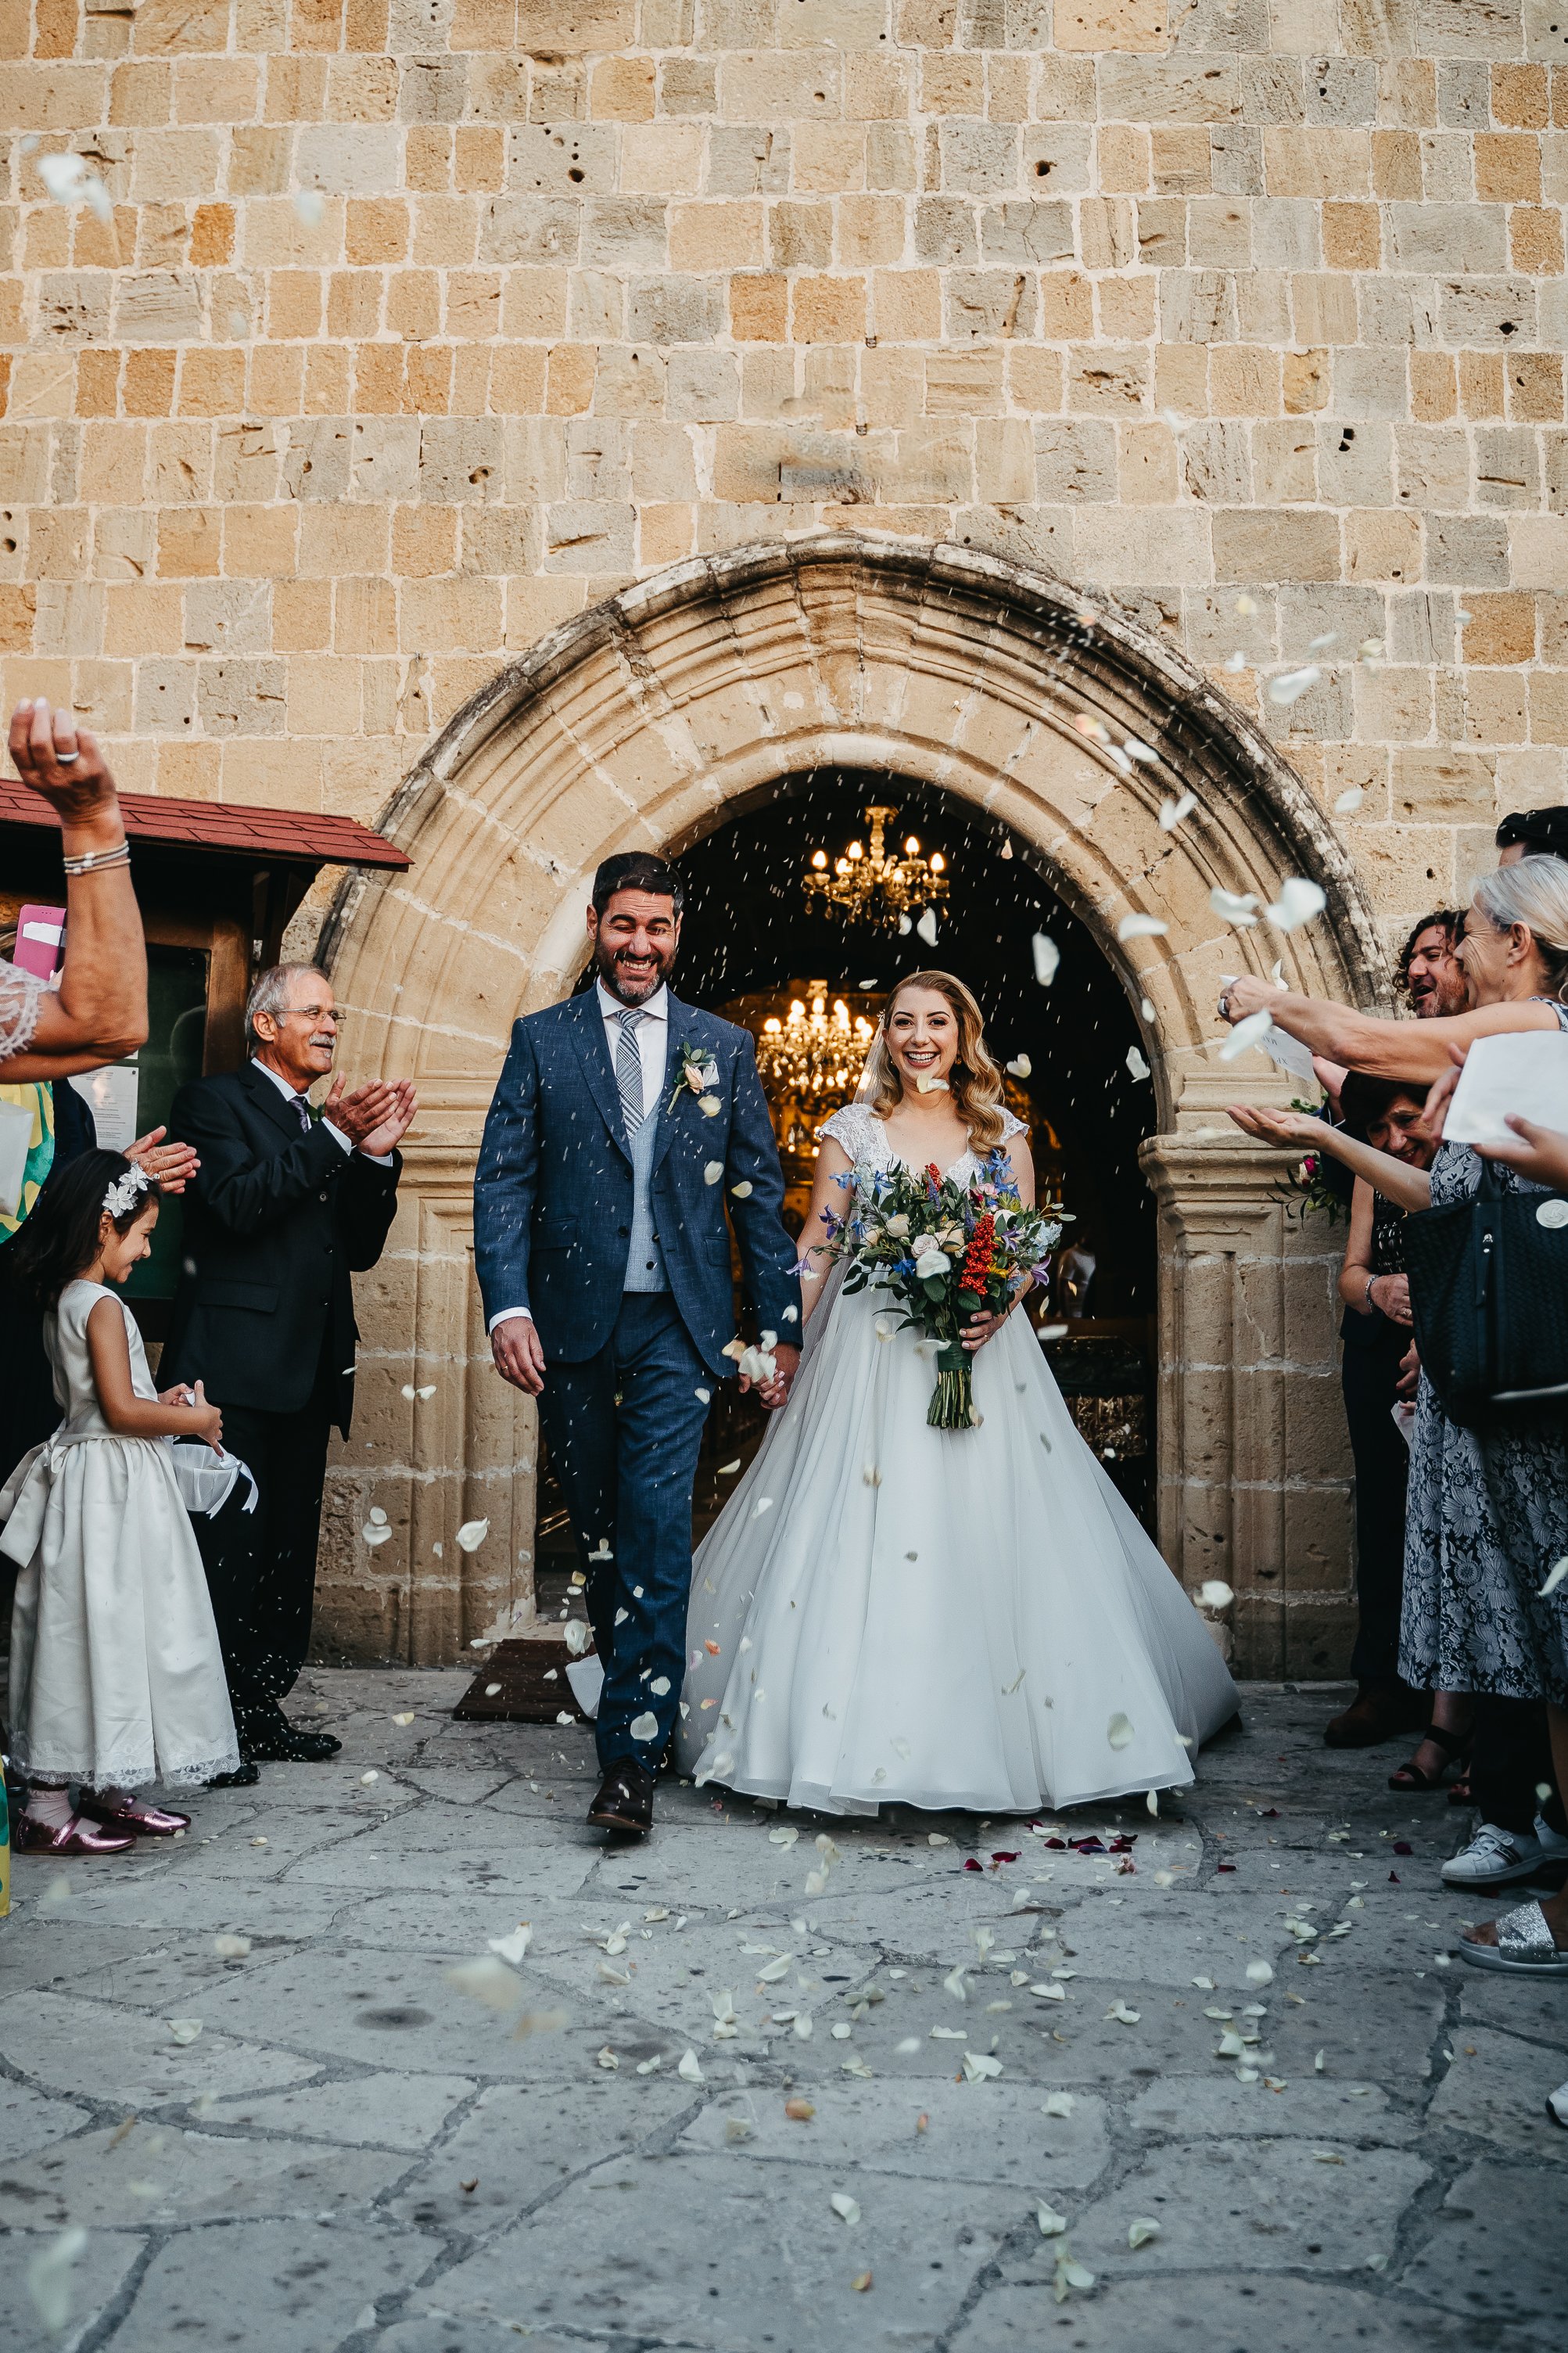 Beautiful boho bride captured in stunning photograph from wedding in Cyprus